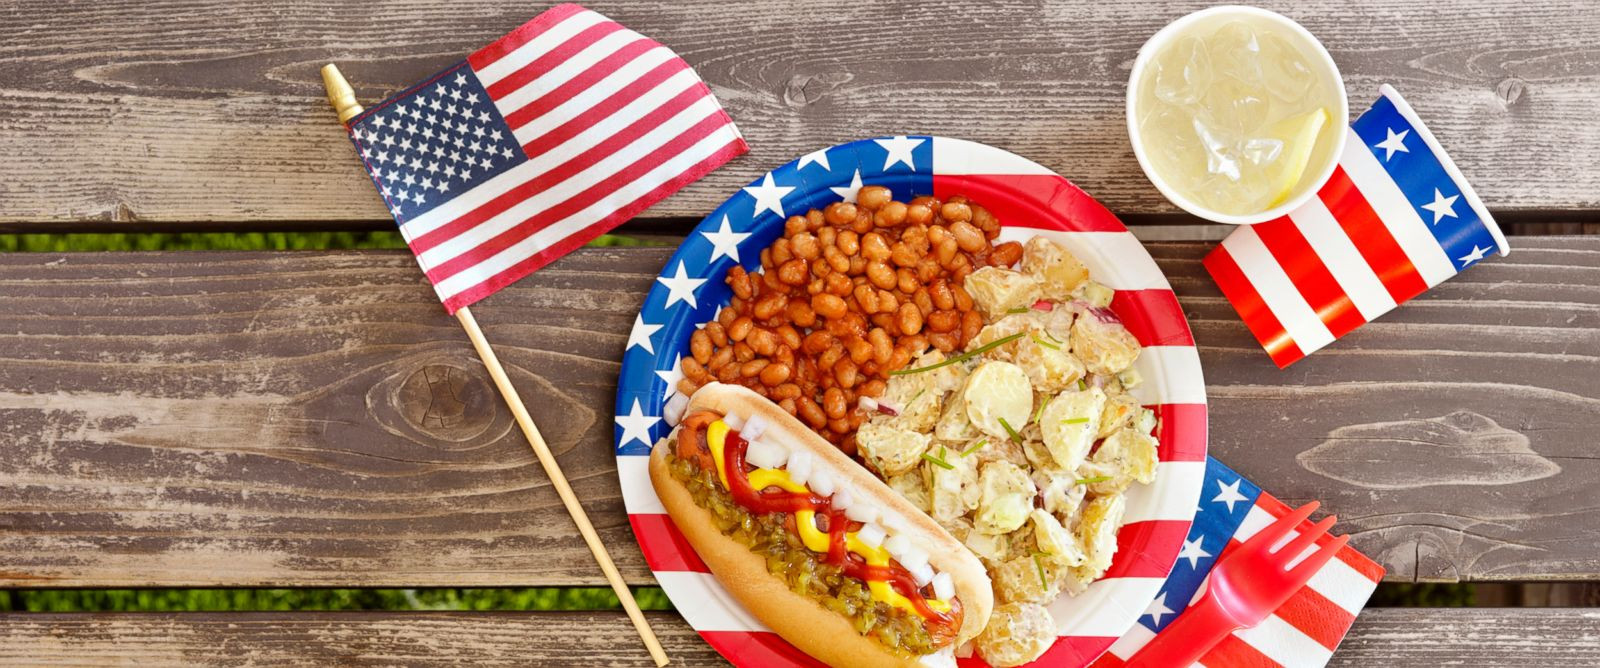 Free Food On Memorial Day
 A few precautions could help keep your Memorial Day